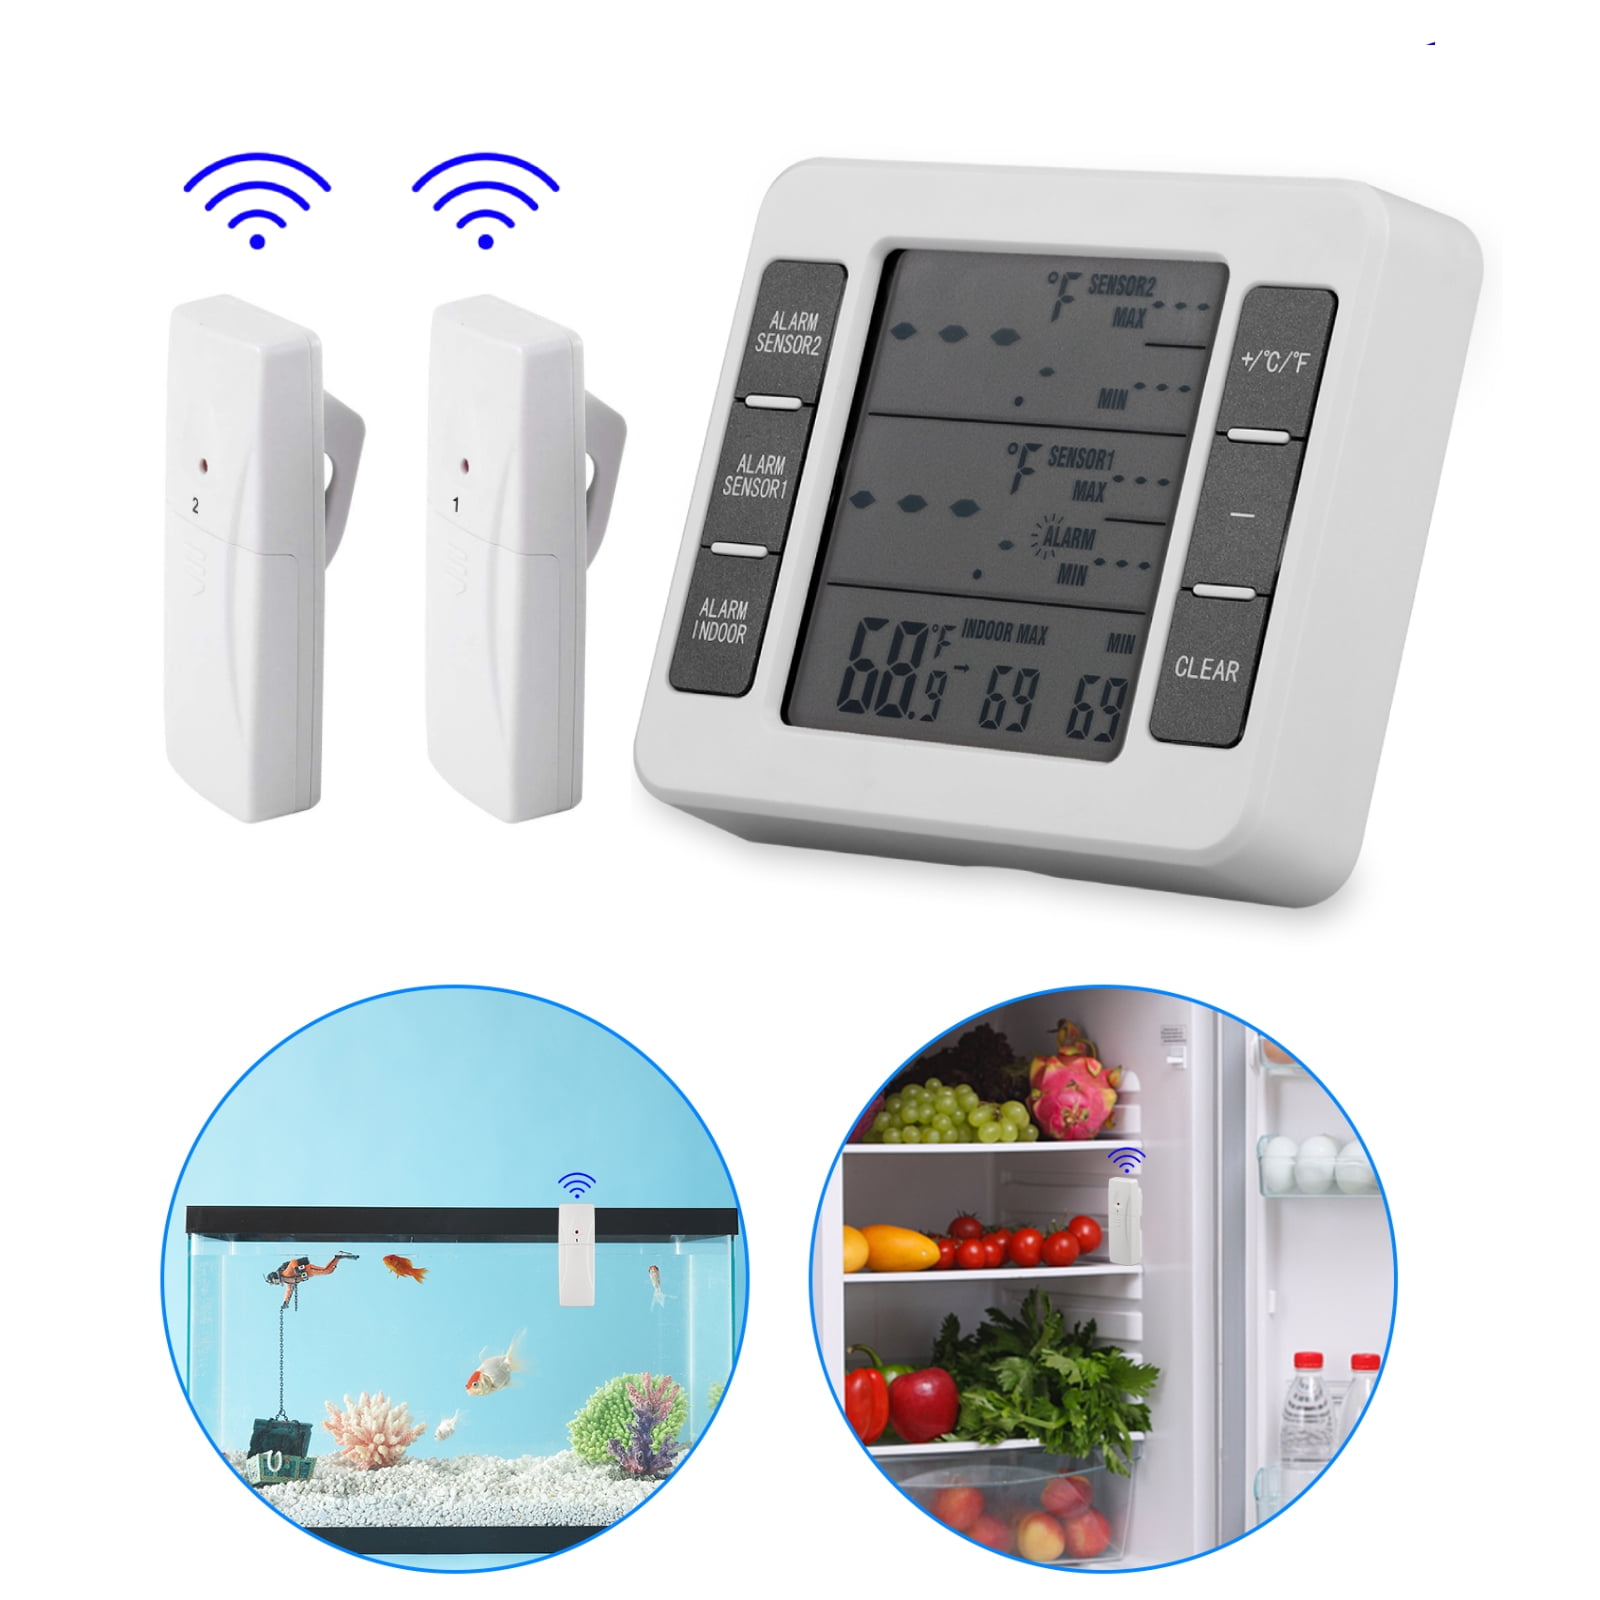 Wireless Digital Thermometer with 2PCS Sensors Temperature Monitor and Audible Alarm Restaurants leegoal Fridge Thermometer Battery not Included Min/Max Record for Home